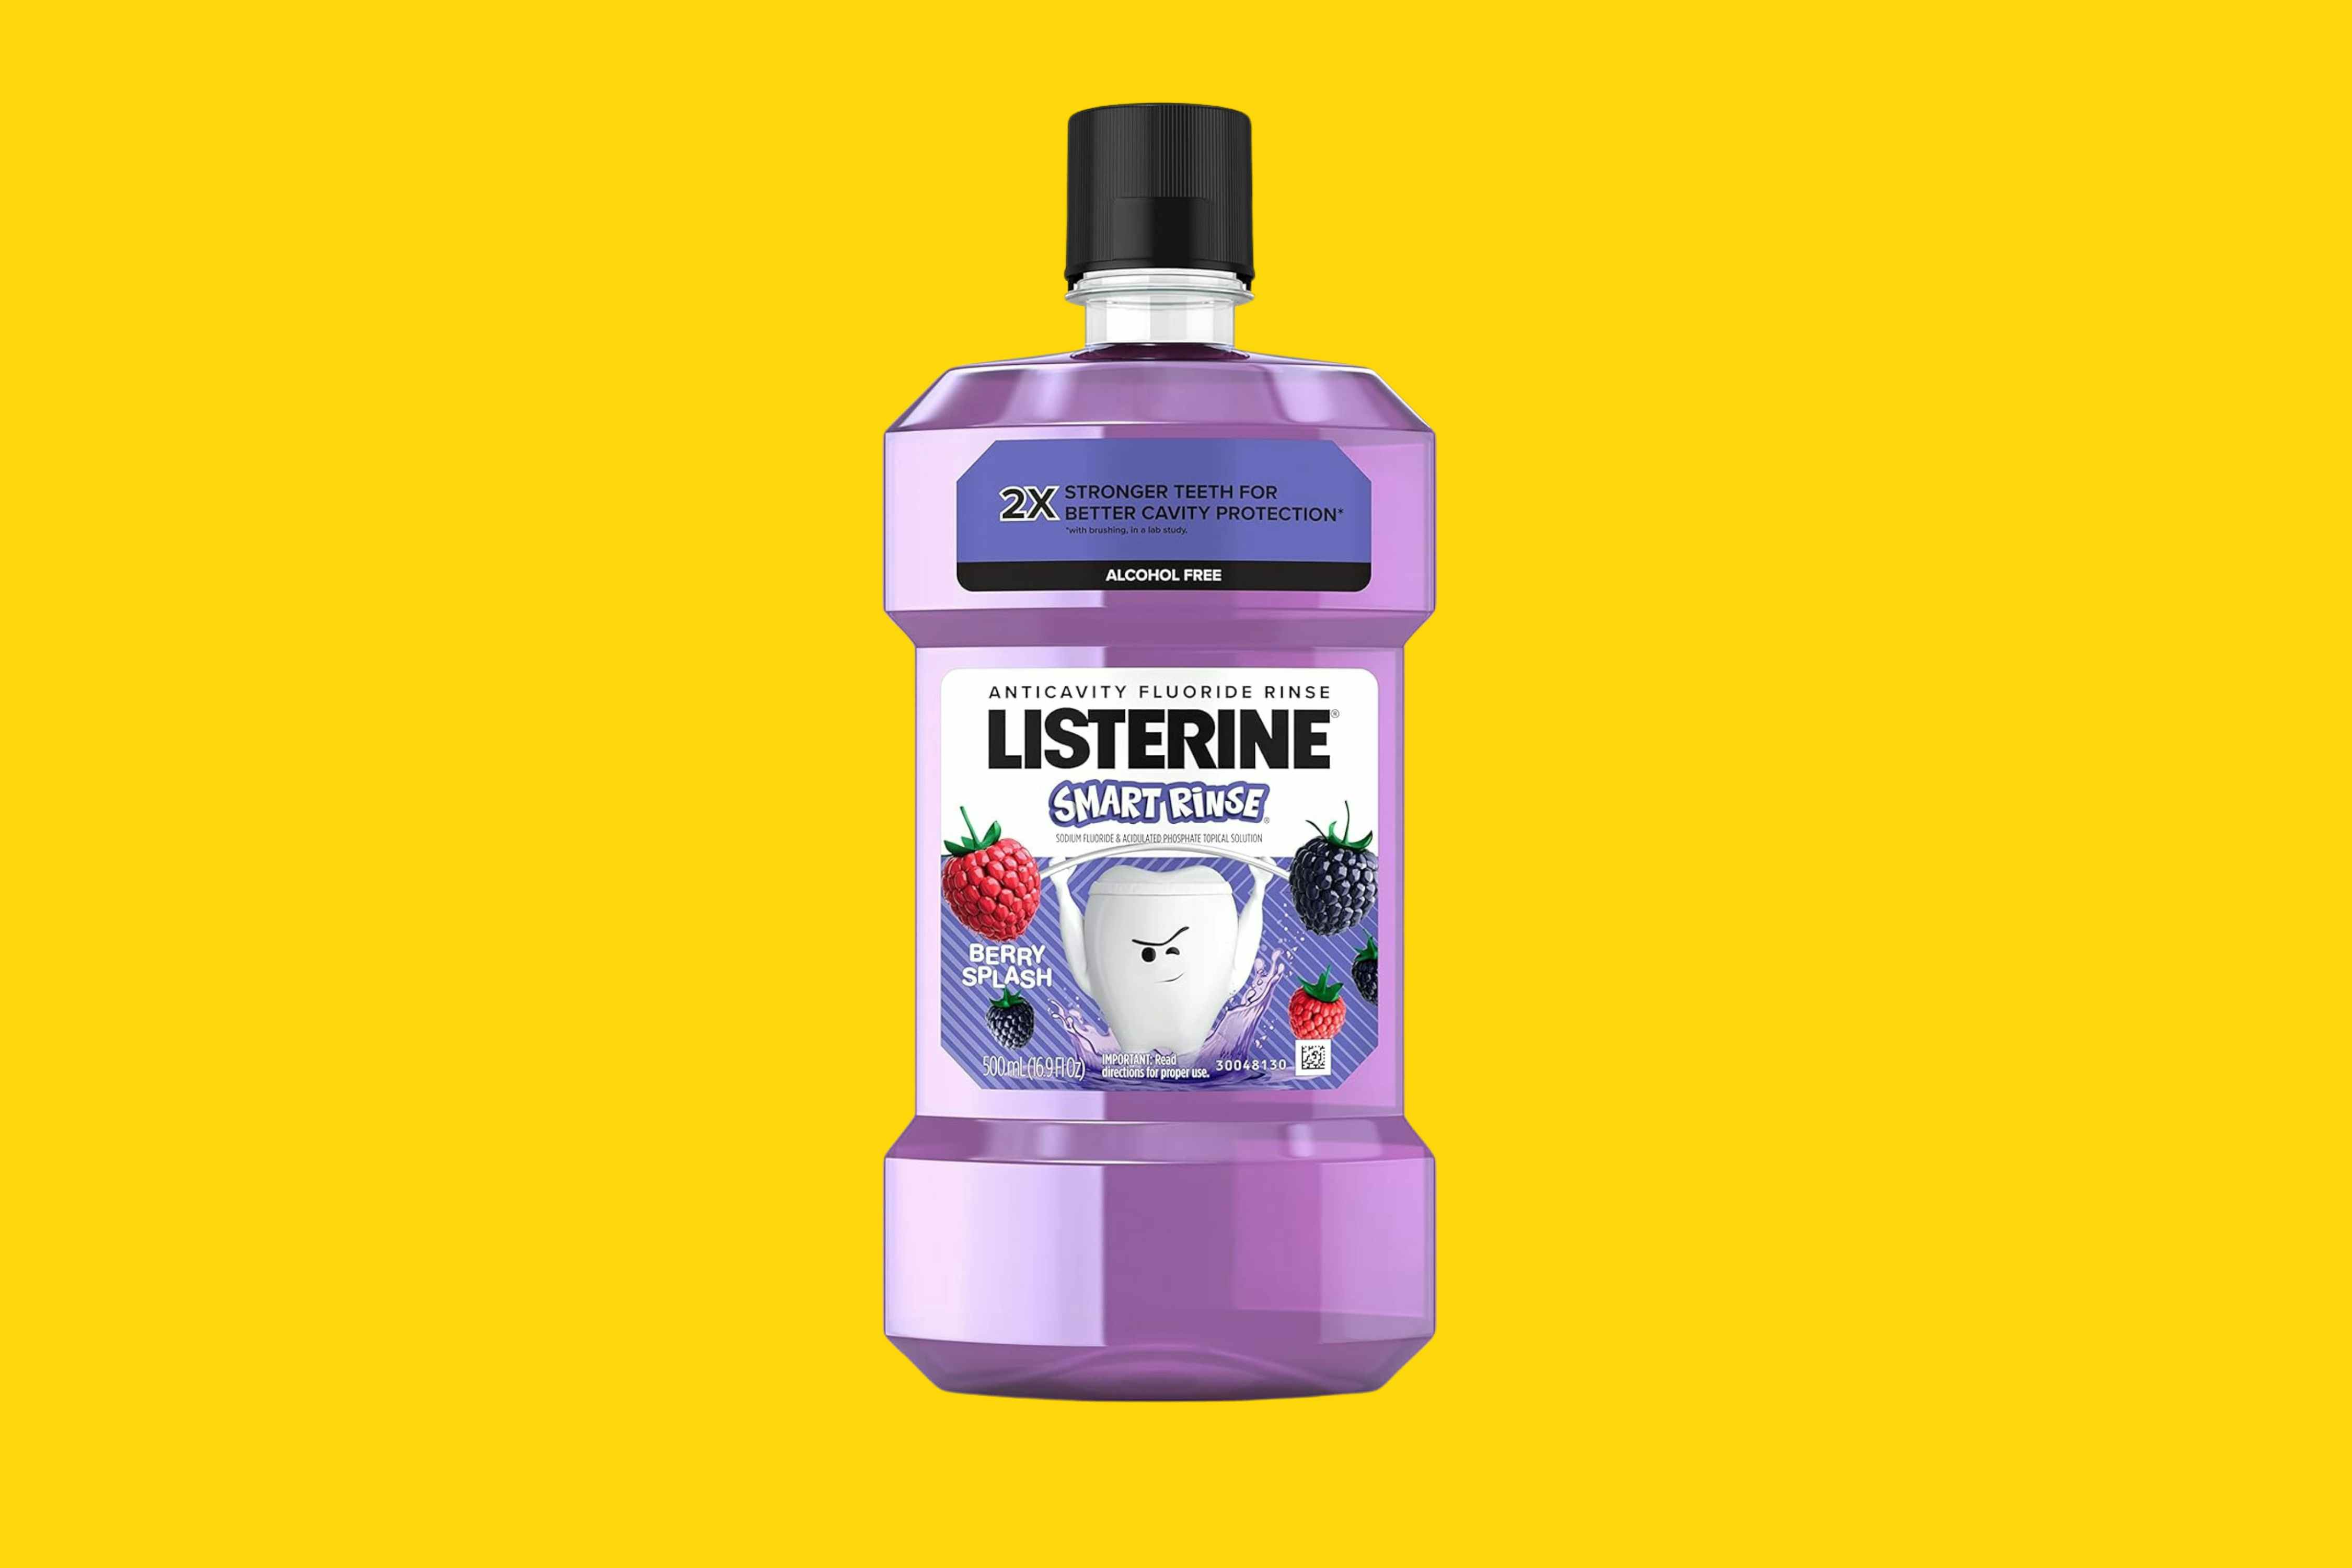 Listerine Kids' Mouthwash, as Low as $3.24 on Amazon